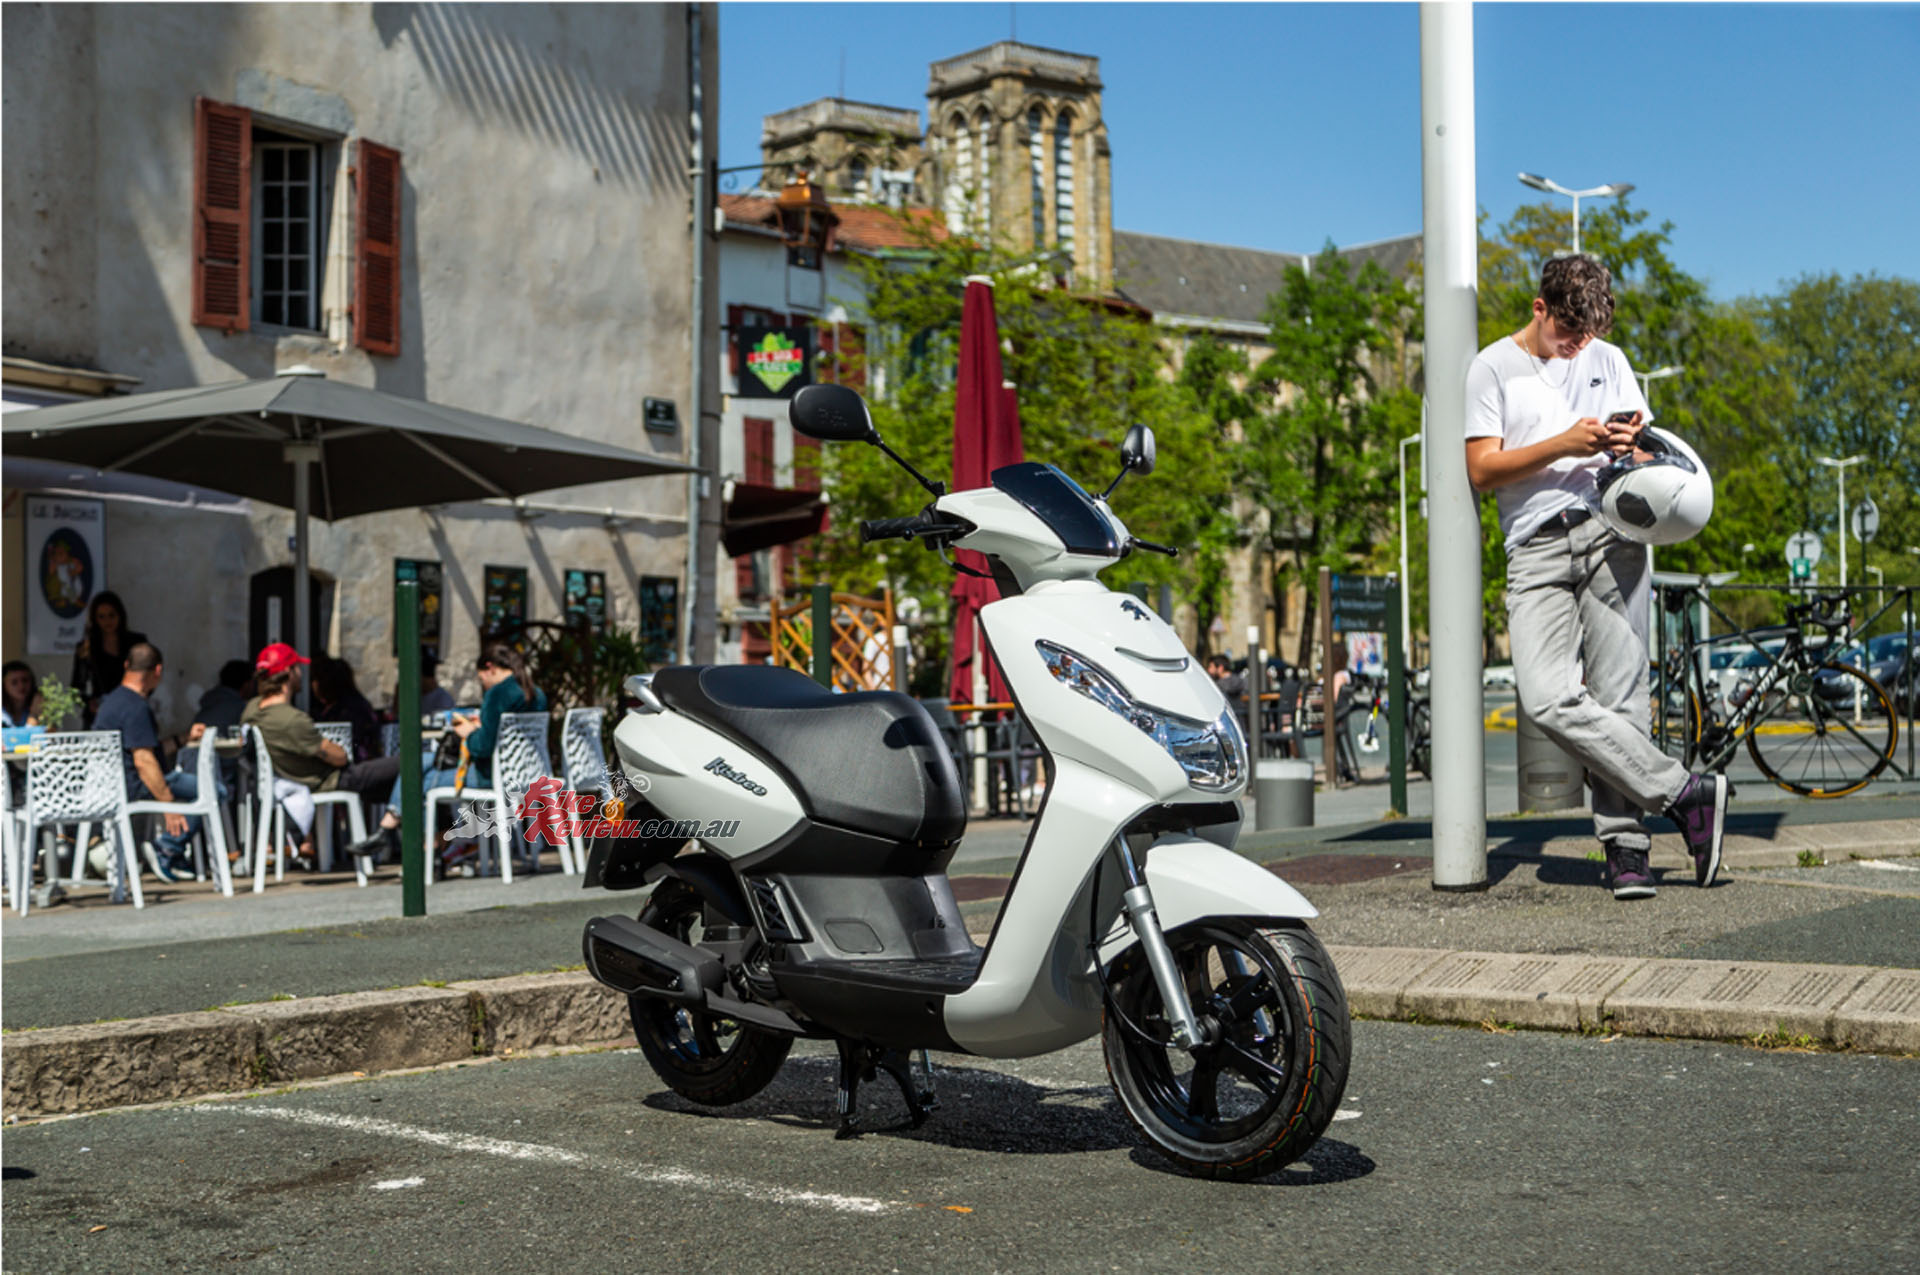 The best-selling model in 27 European countries, the Kisbee is the benchmark 50cc urban scooter.